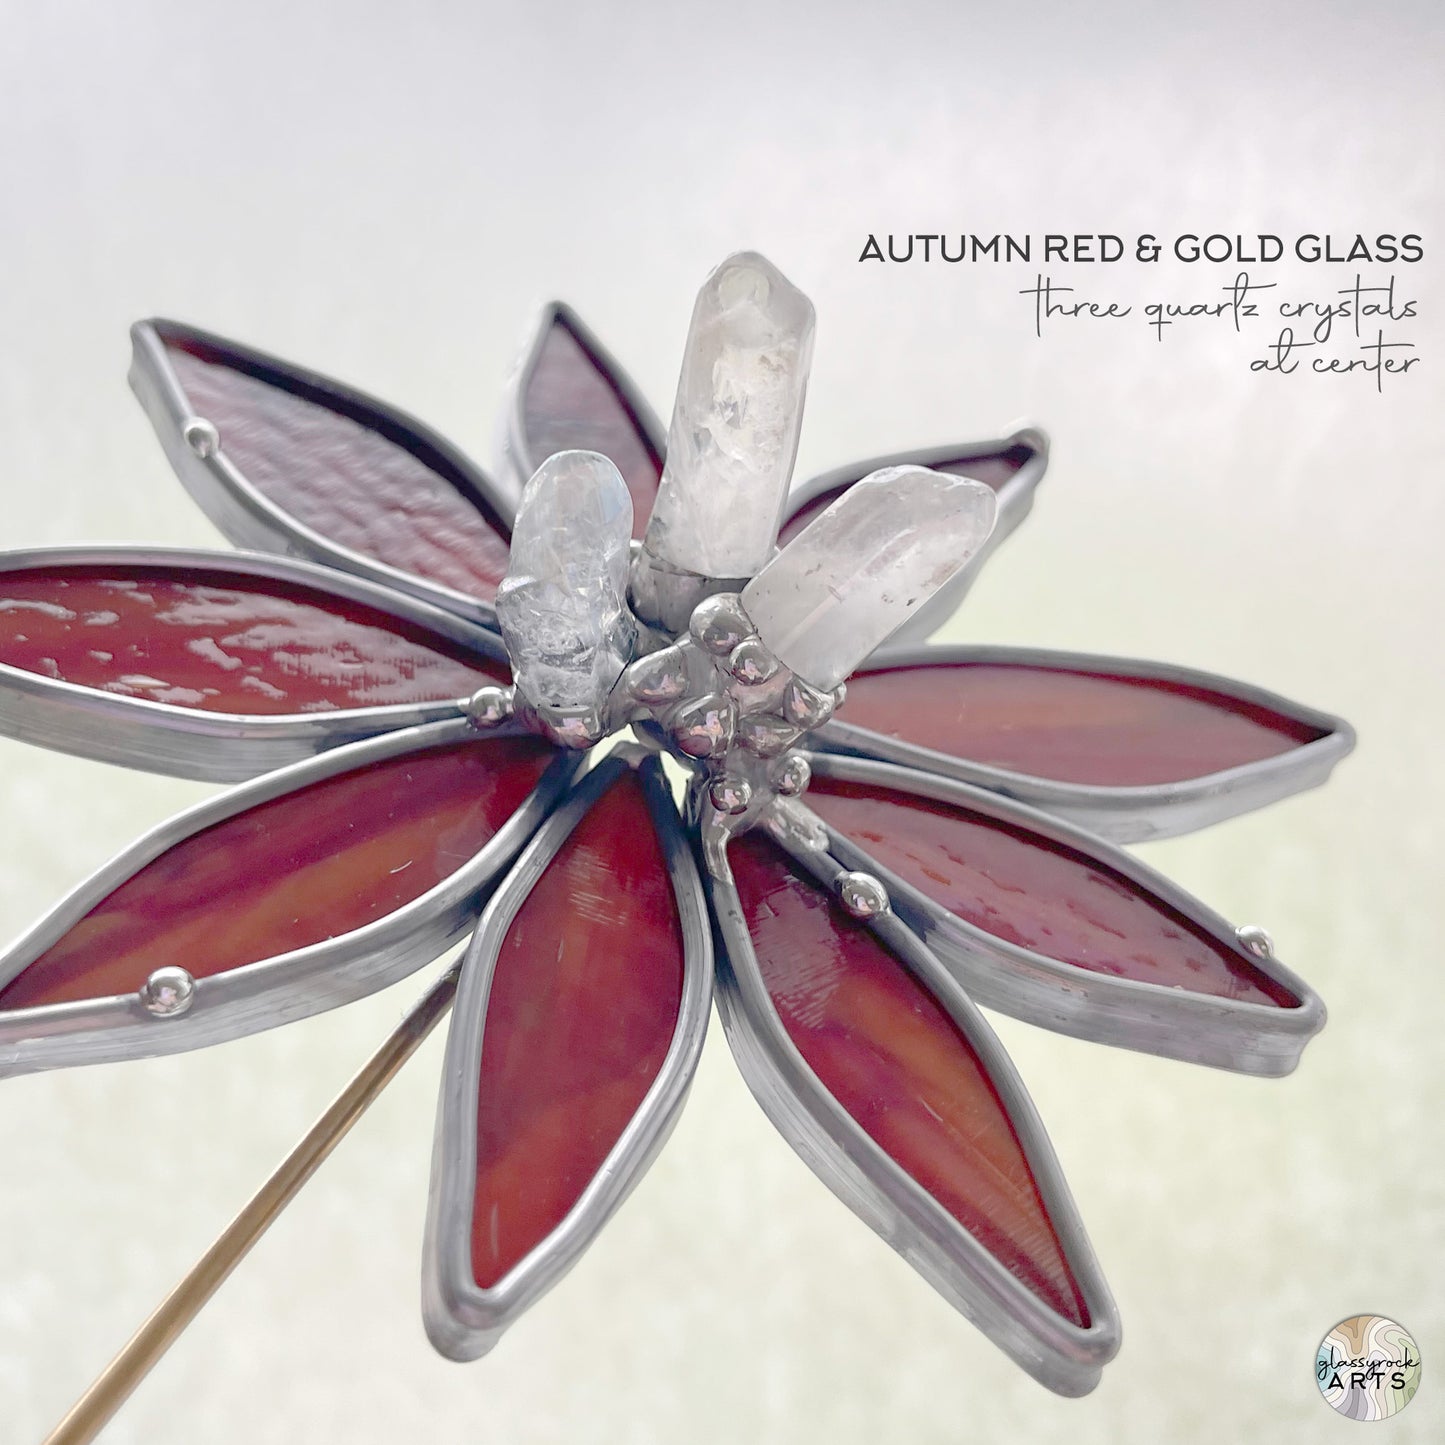 Handmade Stained Glass Flower and Crystal Plant Stake - Red and Gold